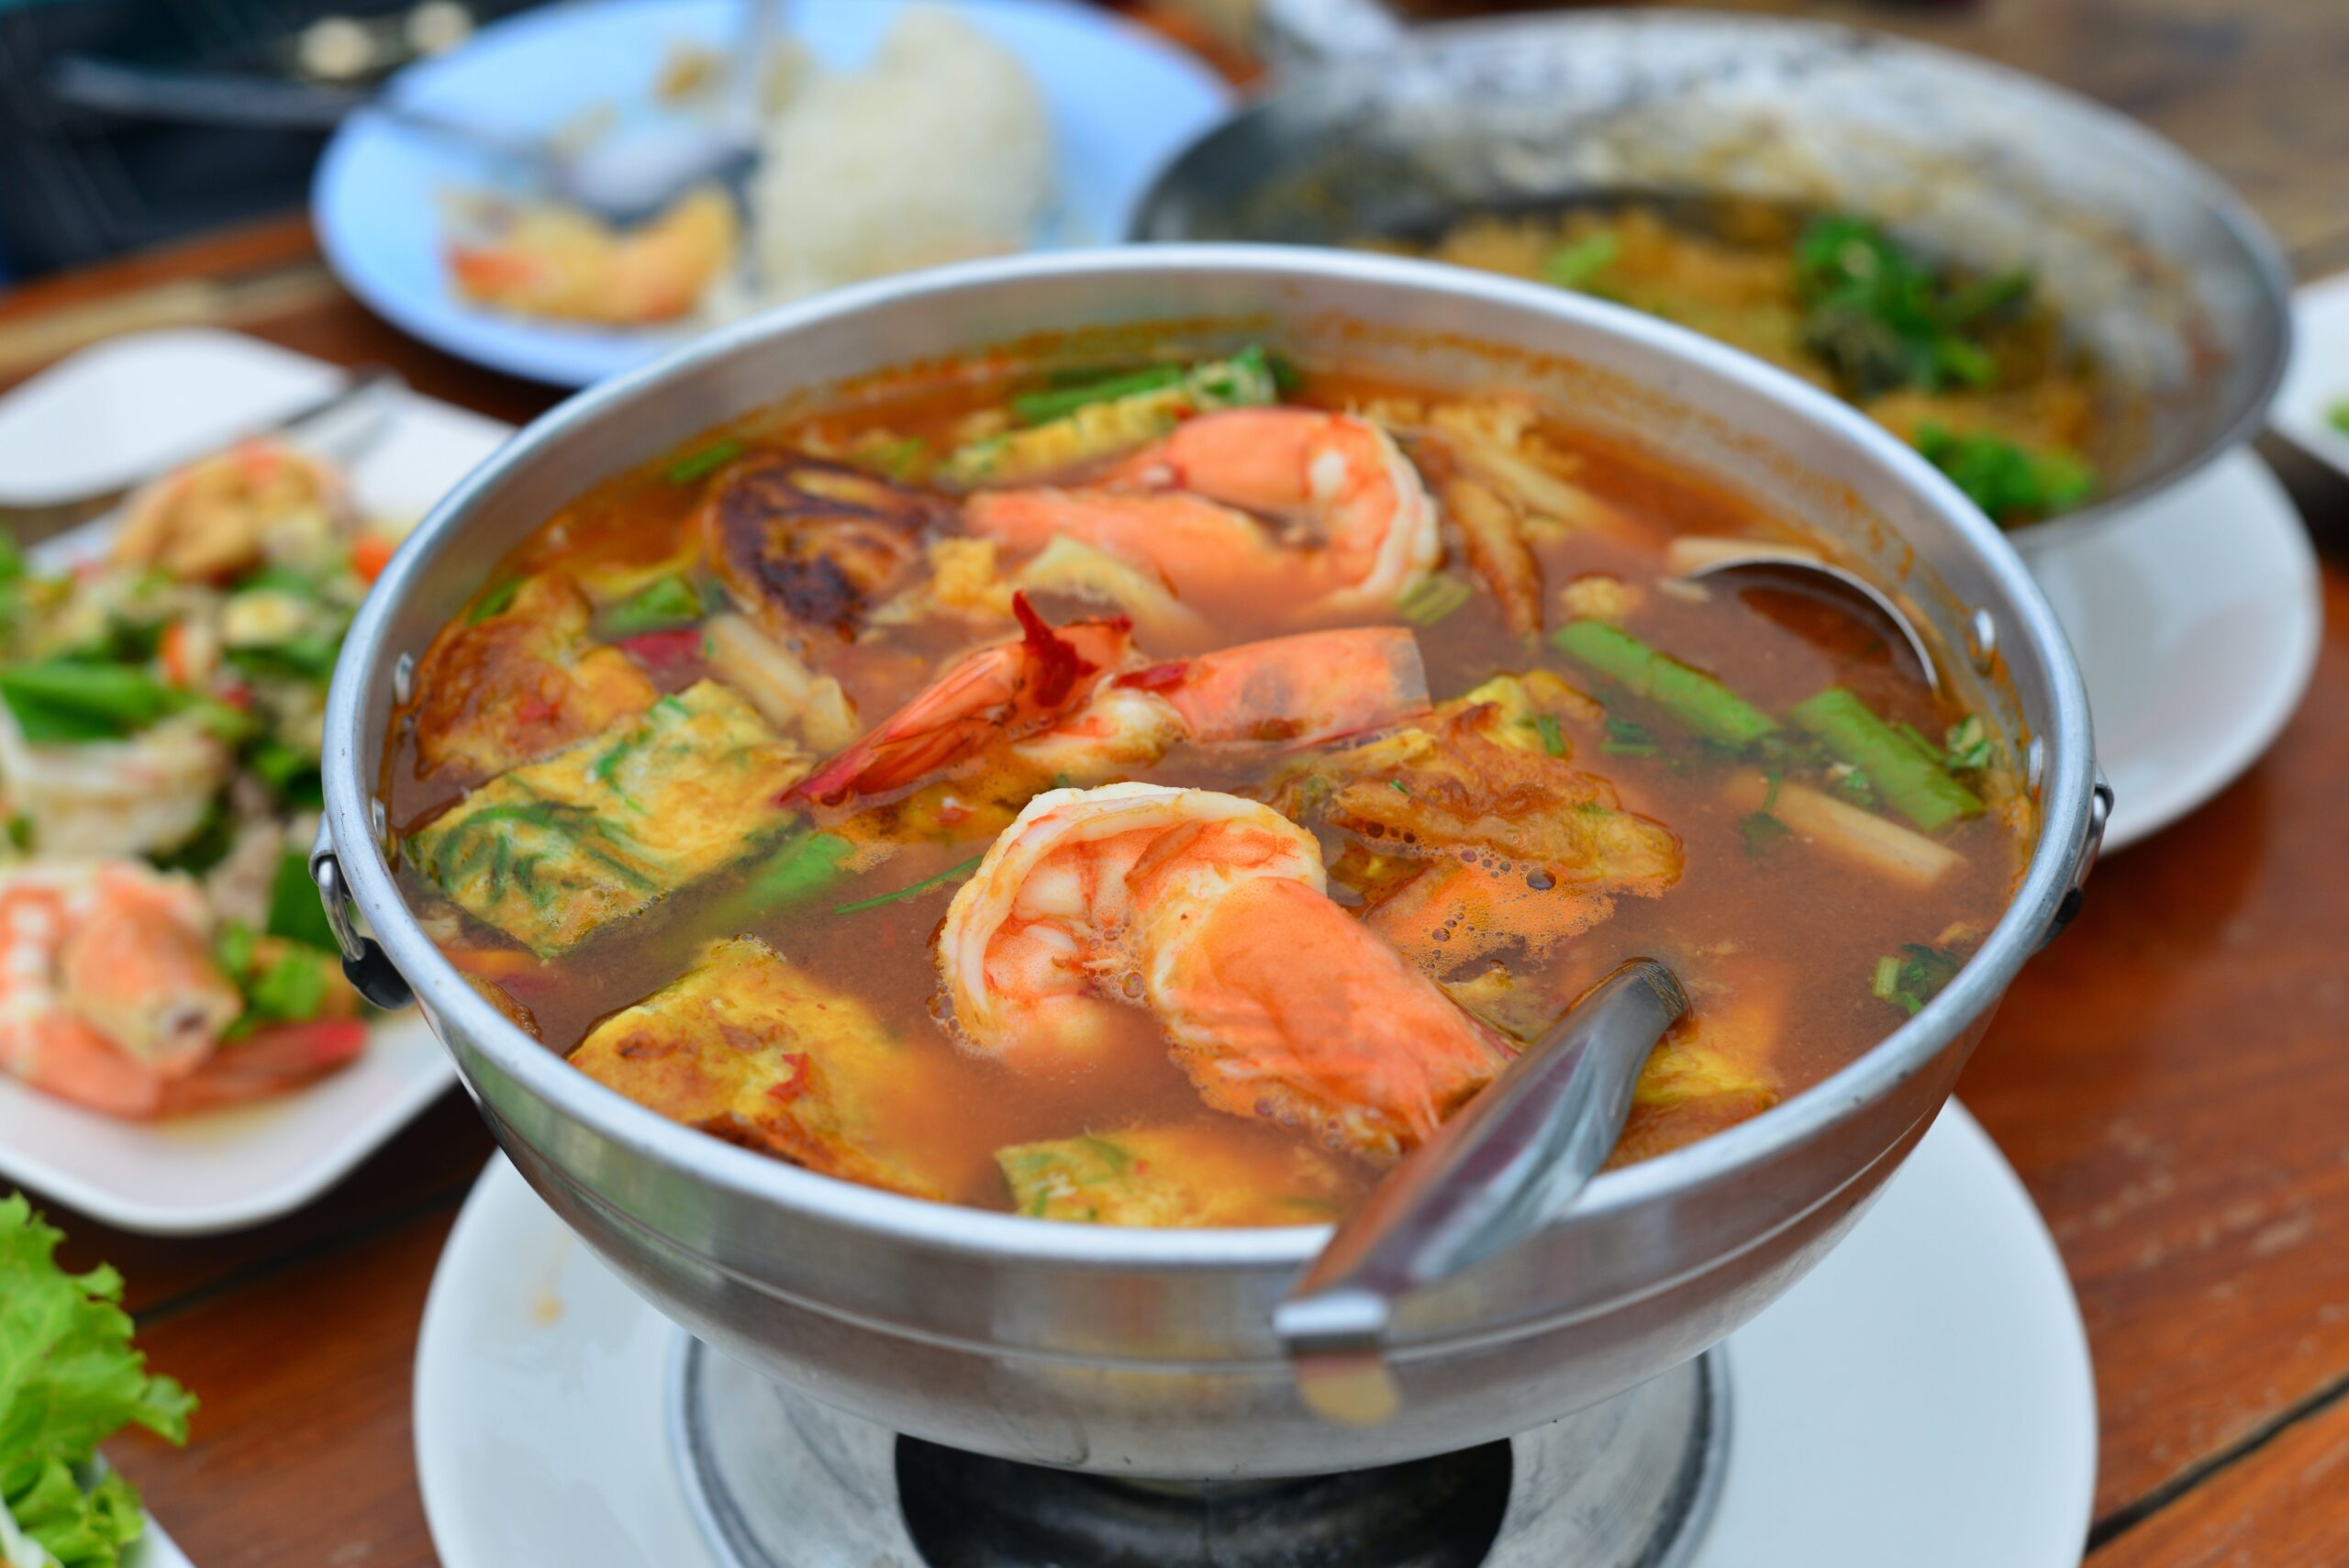 tom yum goong, a hot and sour soup in Thailand